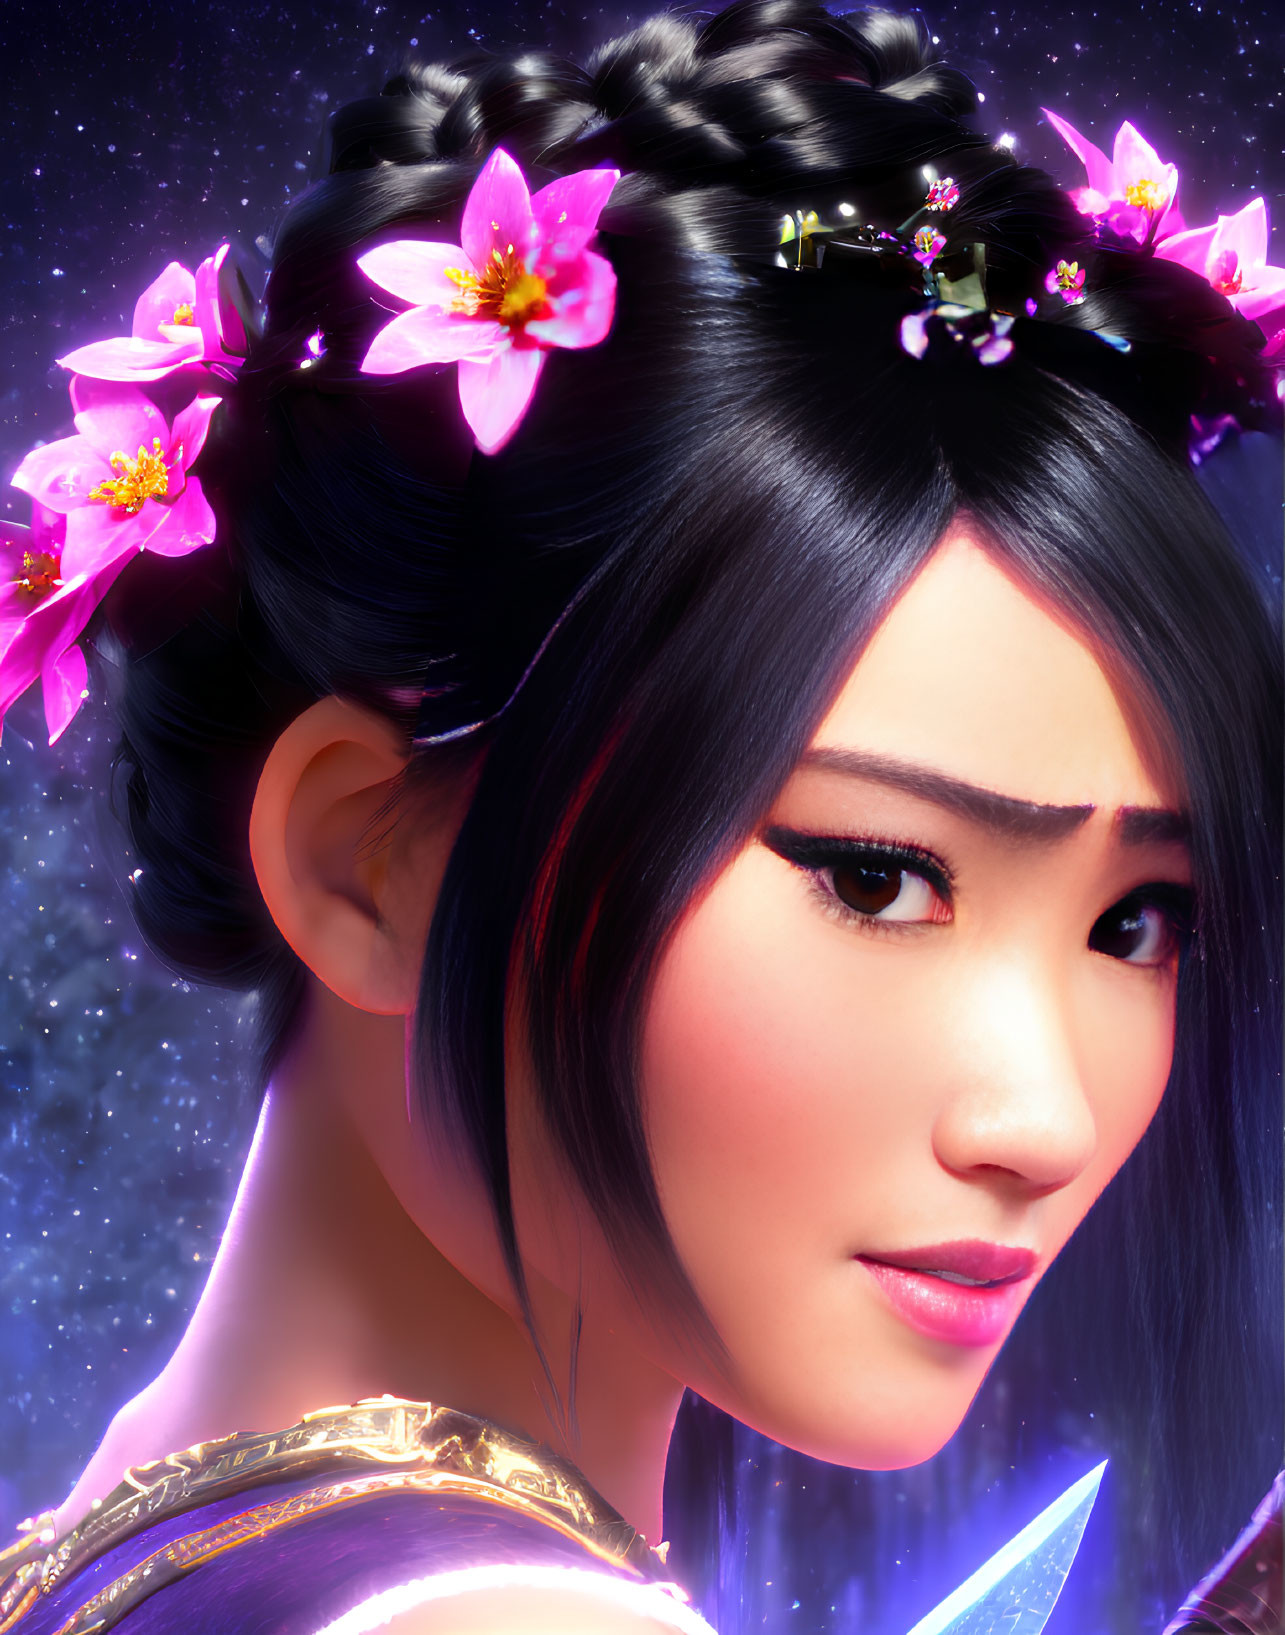 Woman with Floral Hair Accessory and Stylized Makeup Against Starry Background